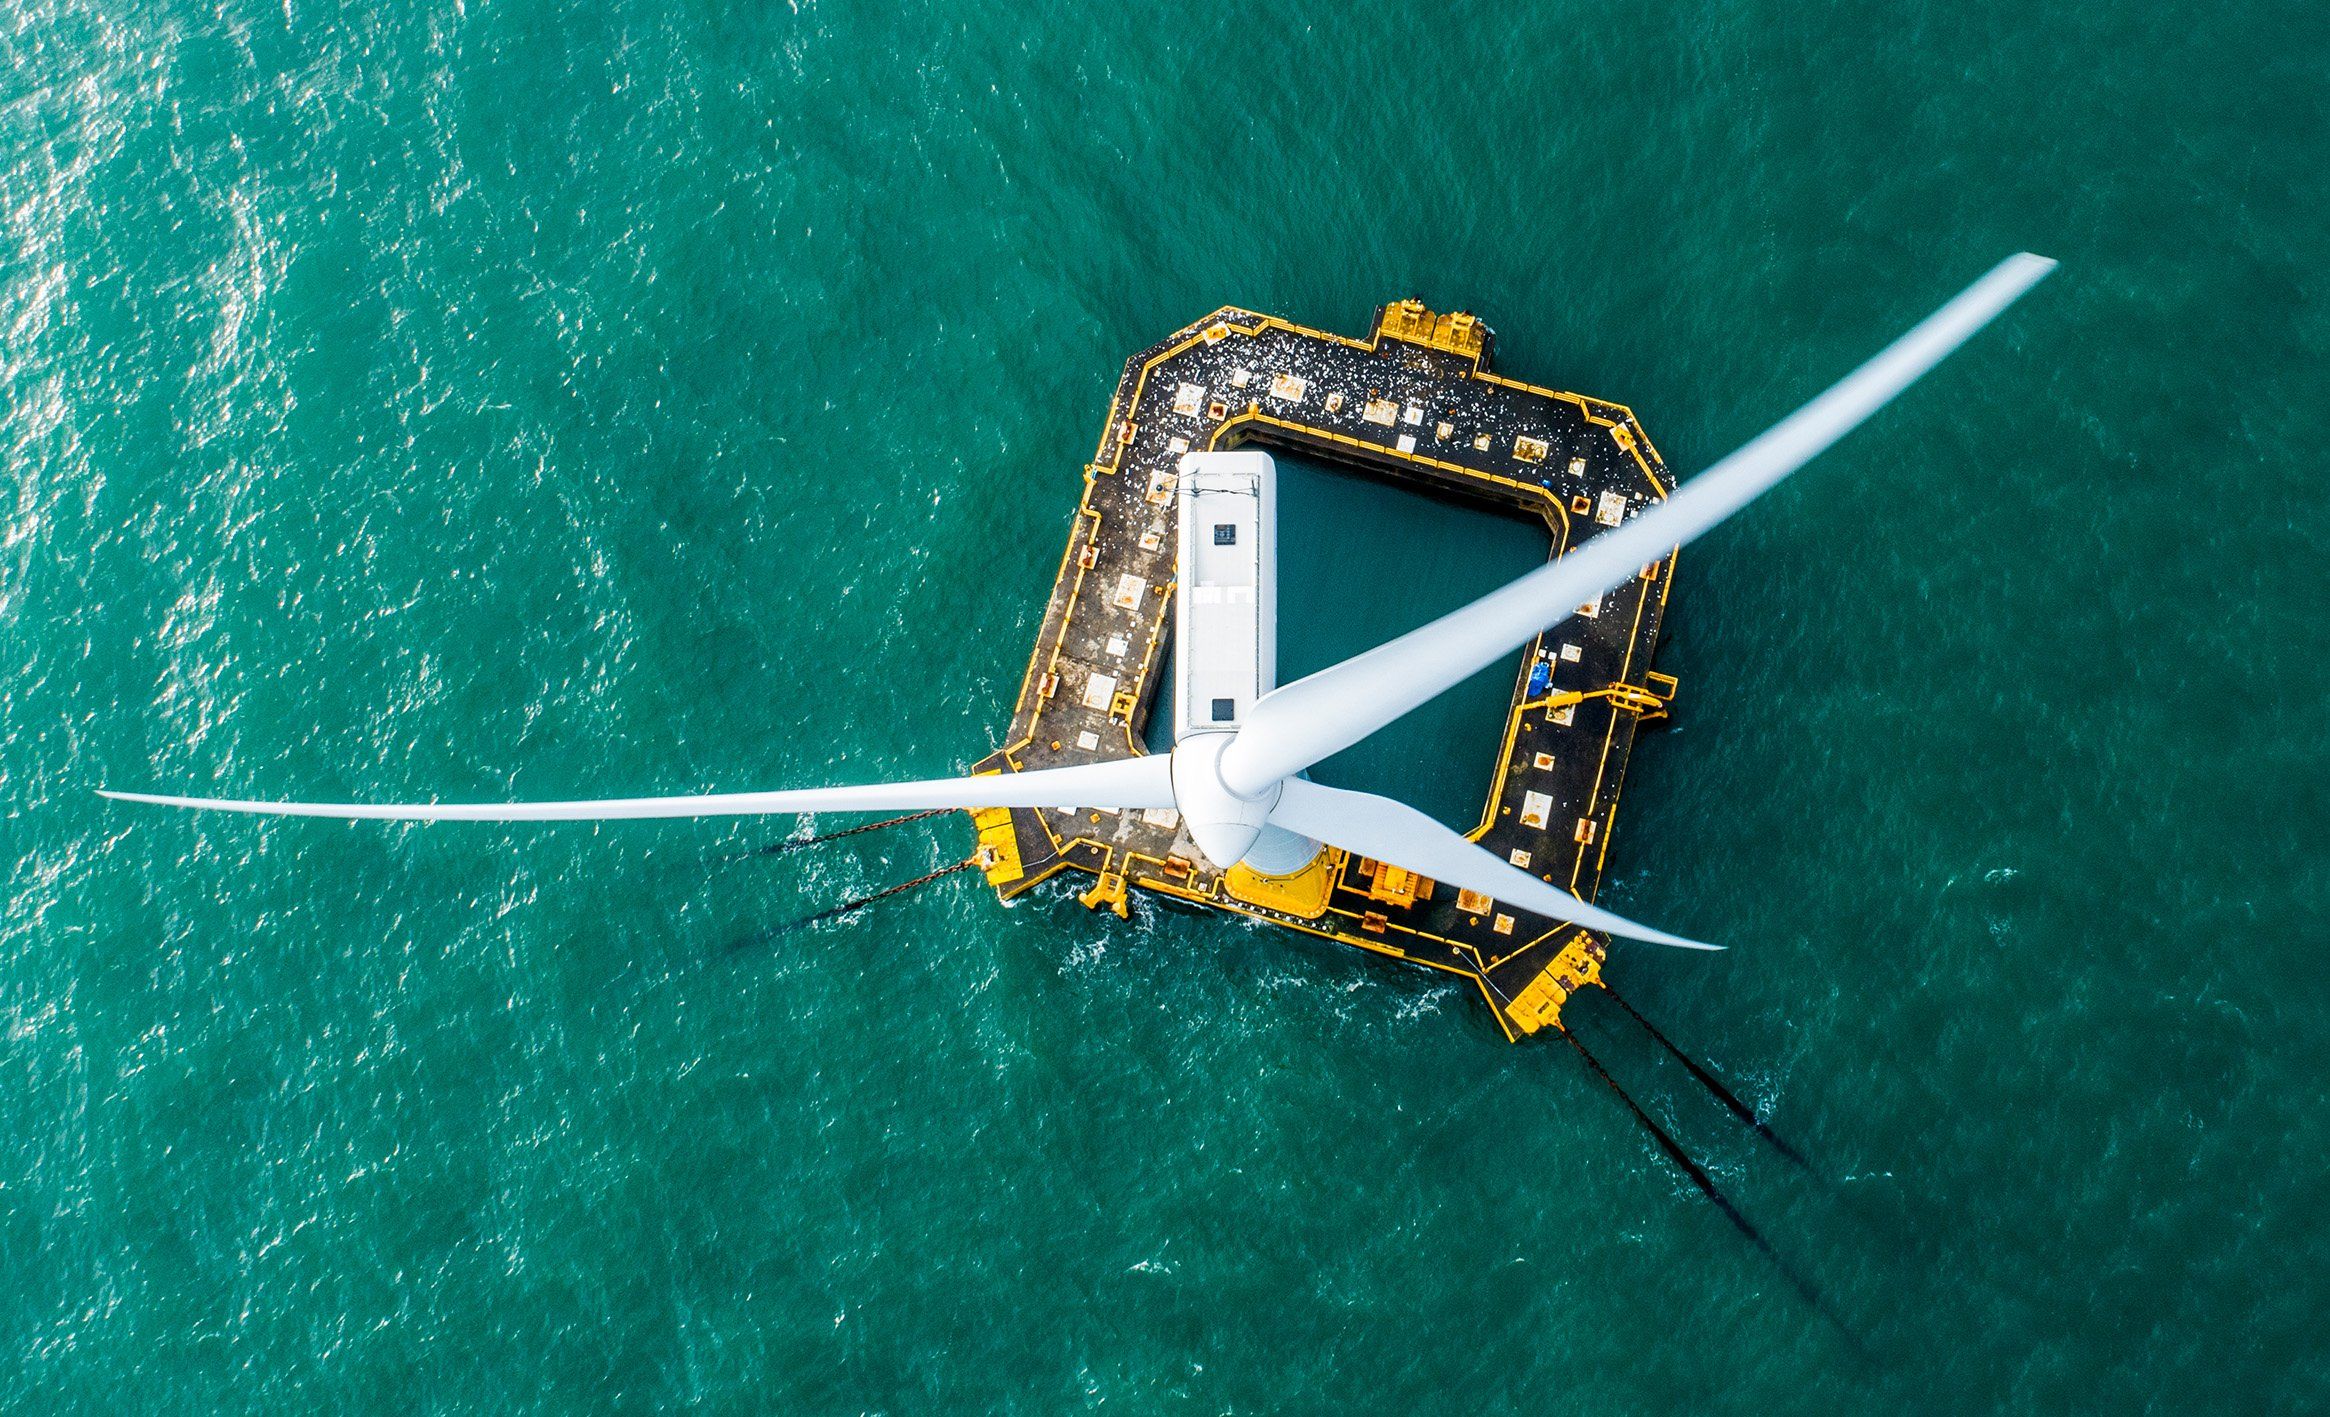 Overhead photo looking down at a wind turbine on a square platform in the ocean.